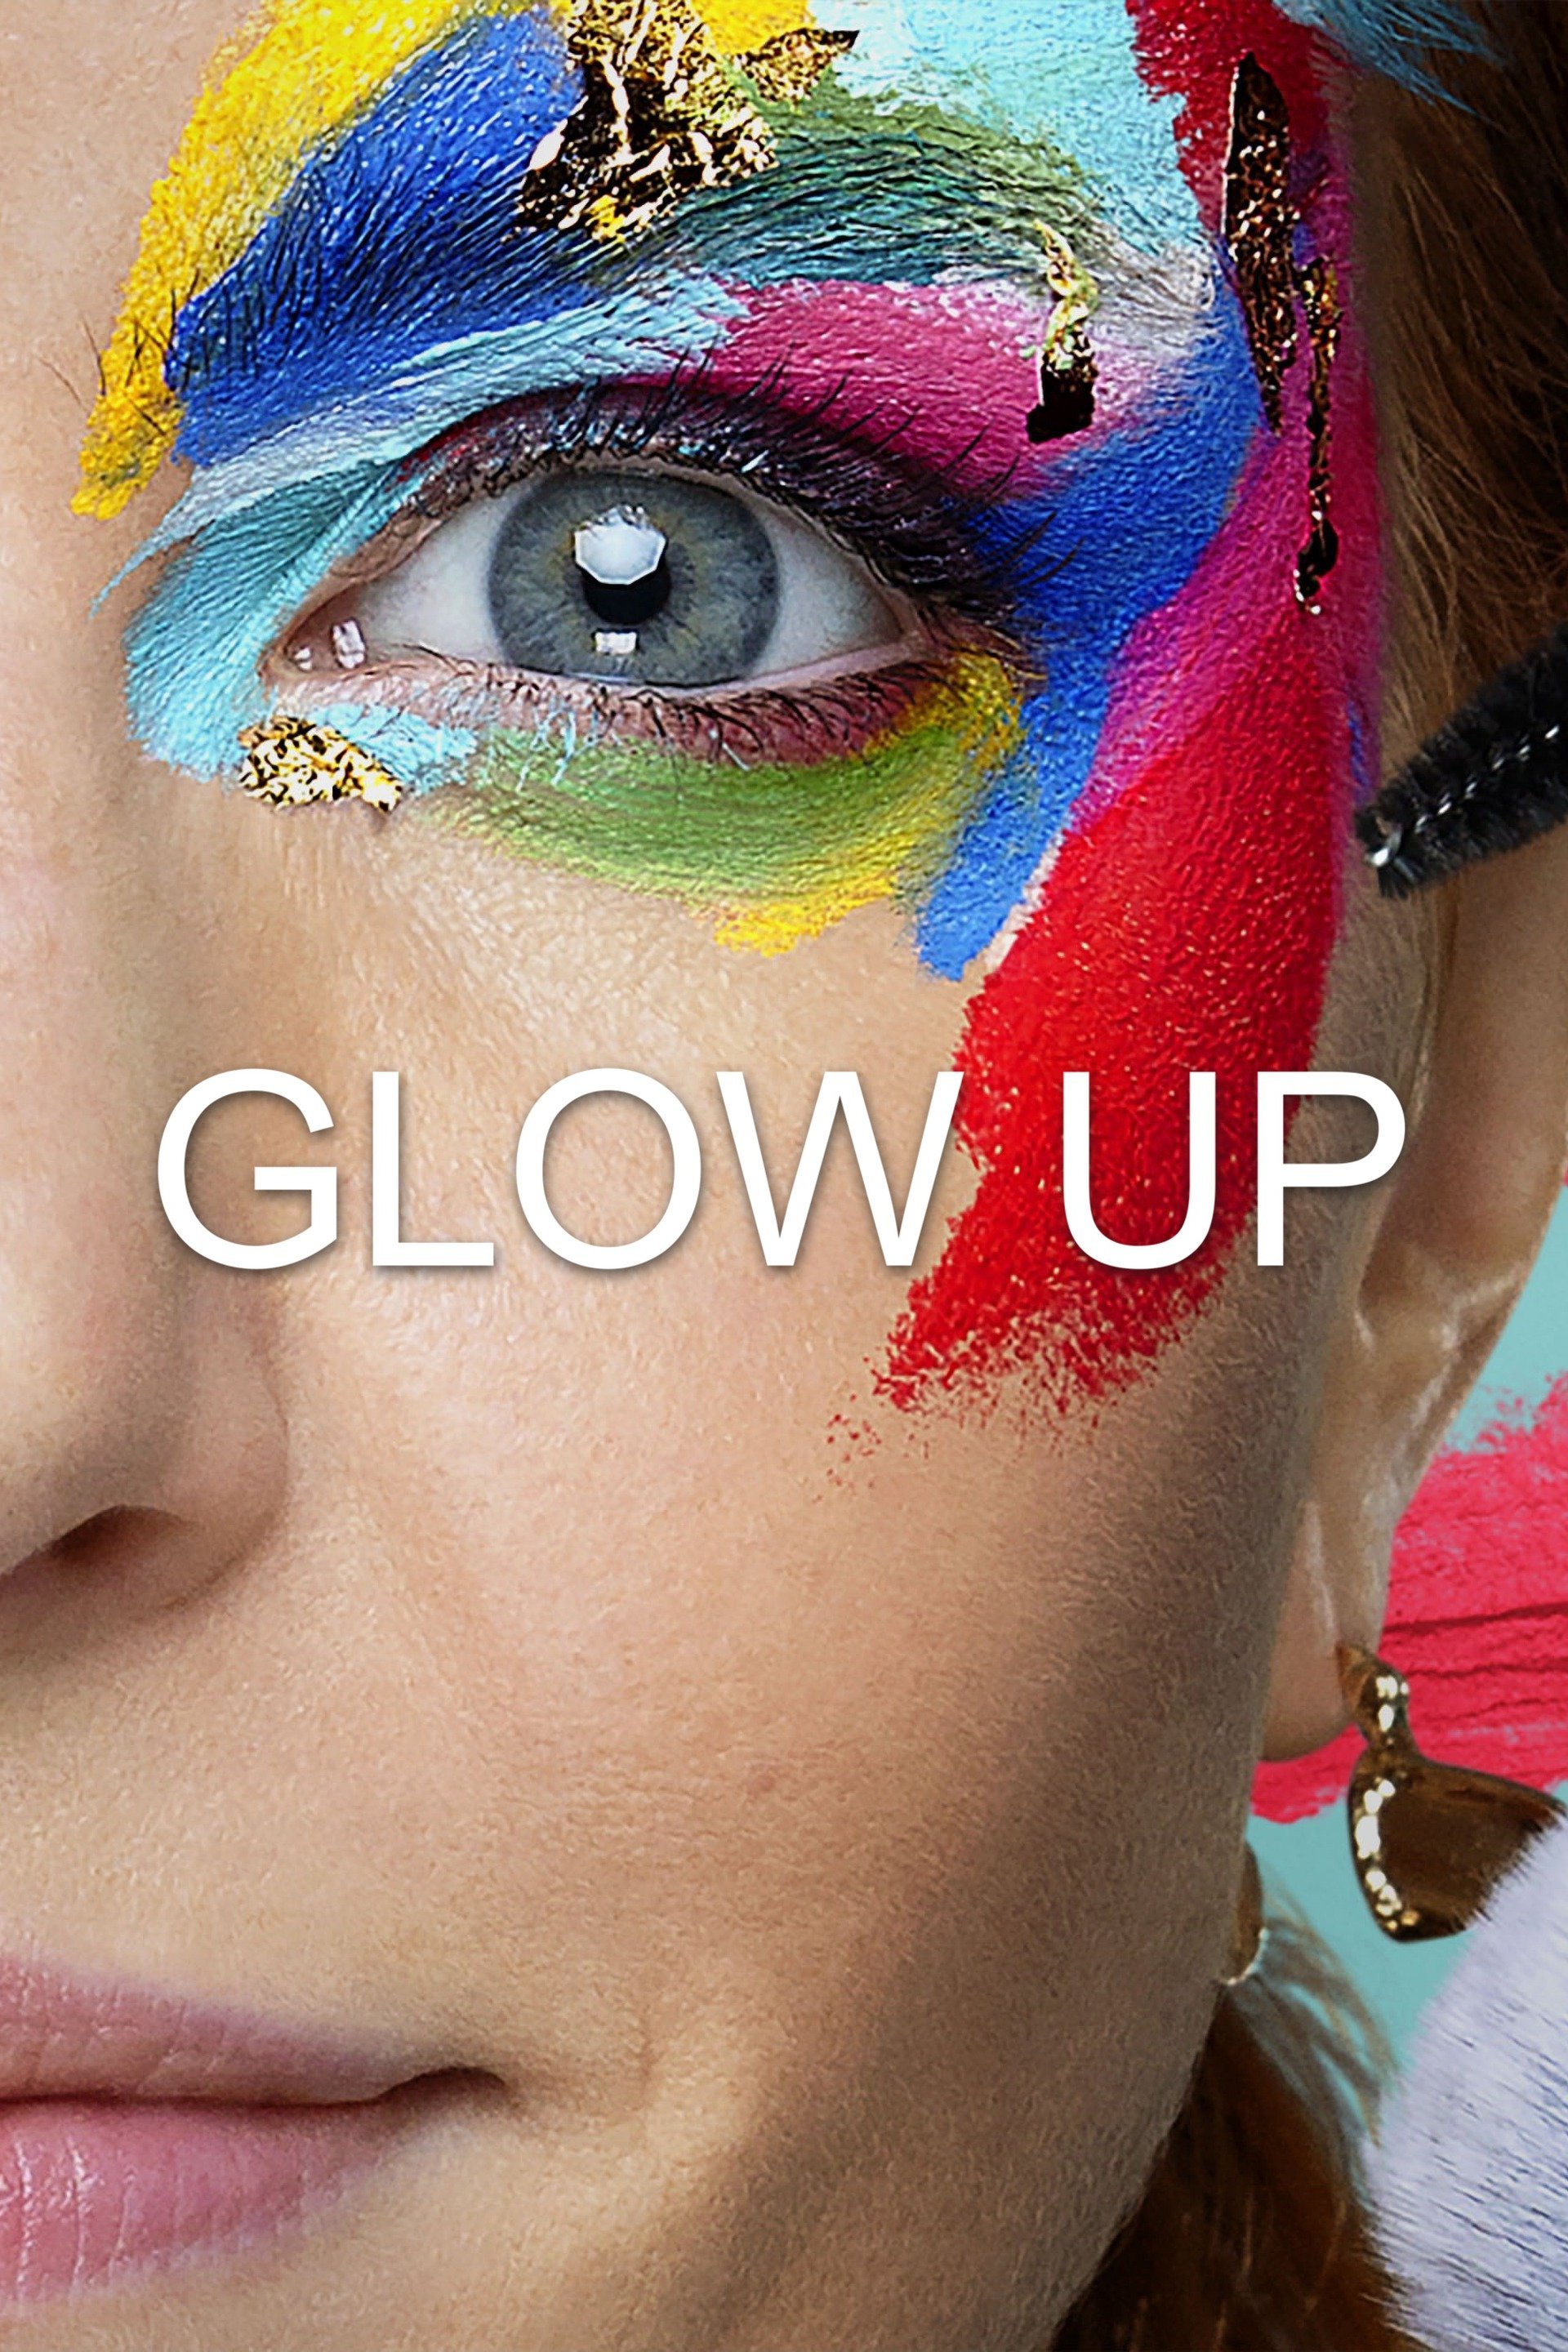 Glow Up: a show so full of makeup and modern slang it will make